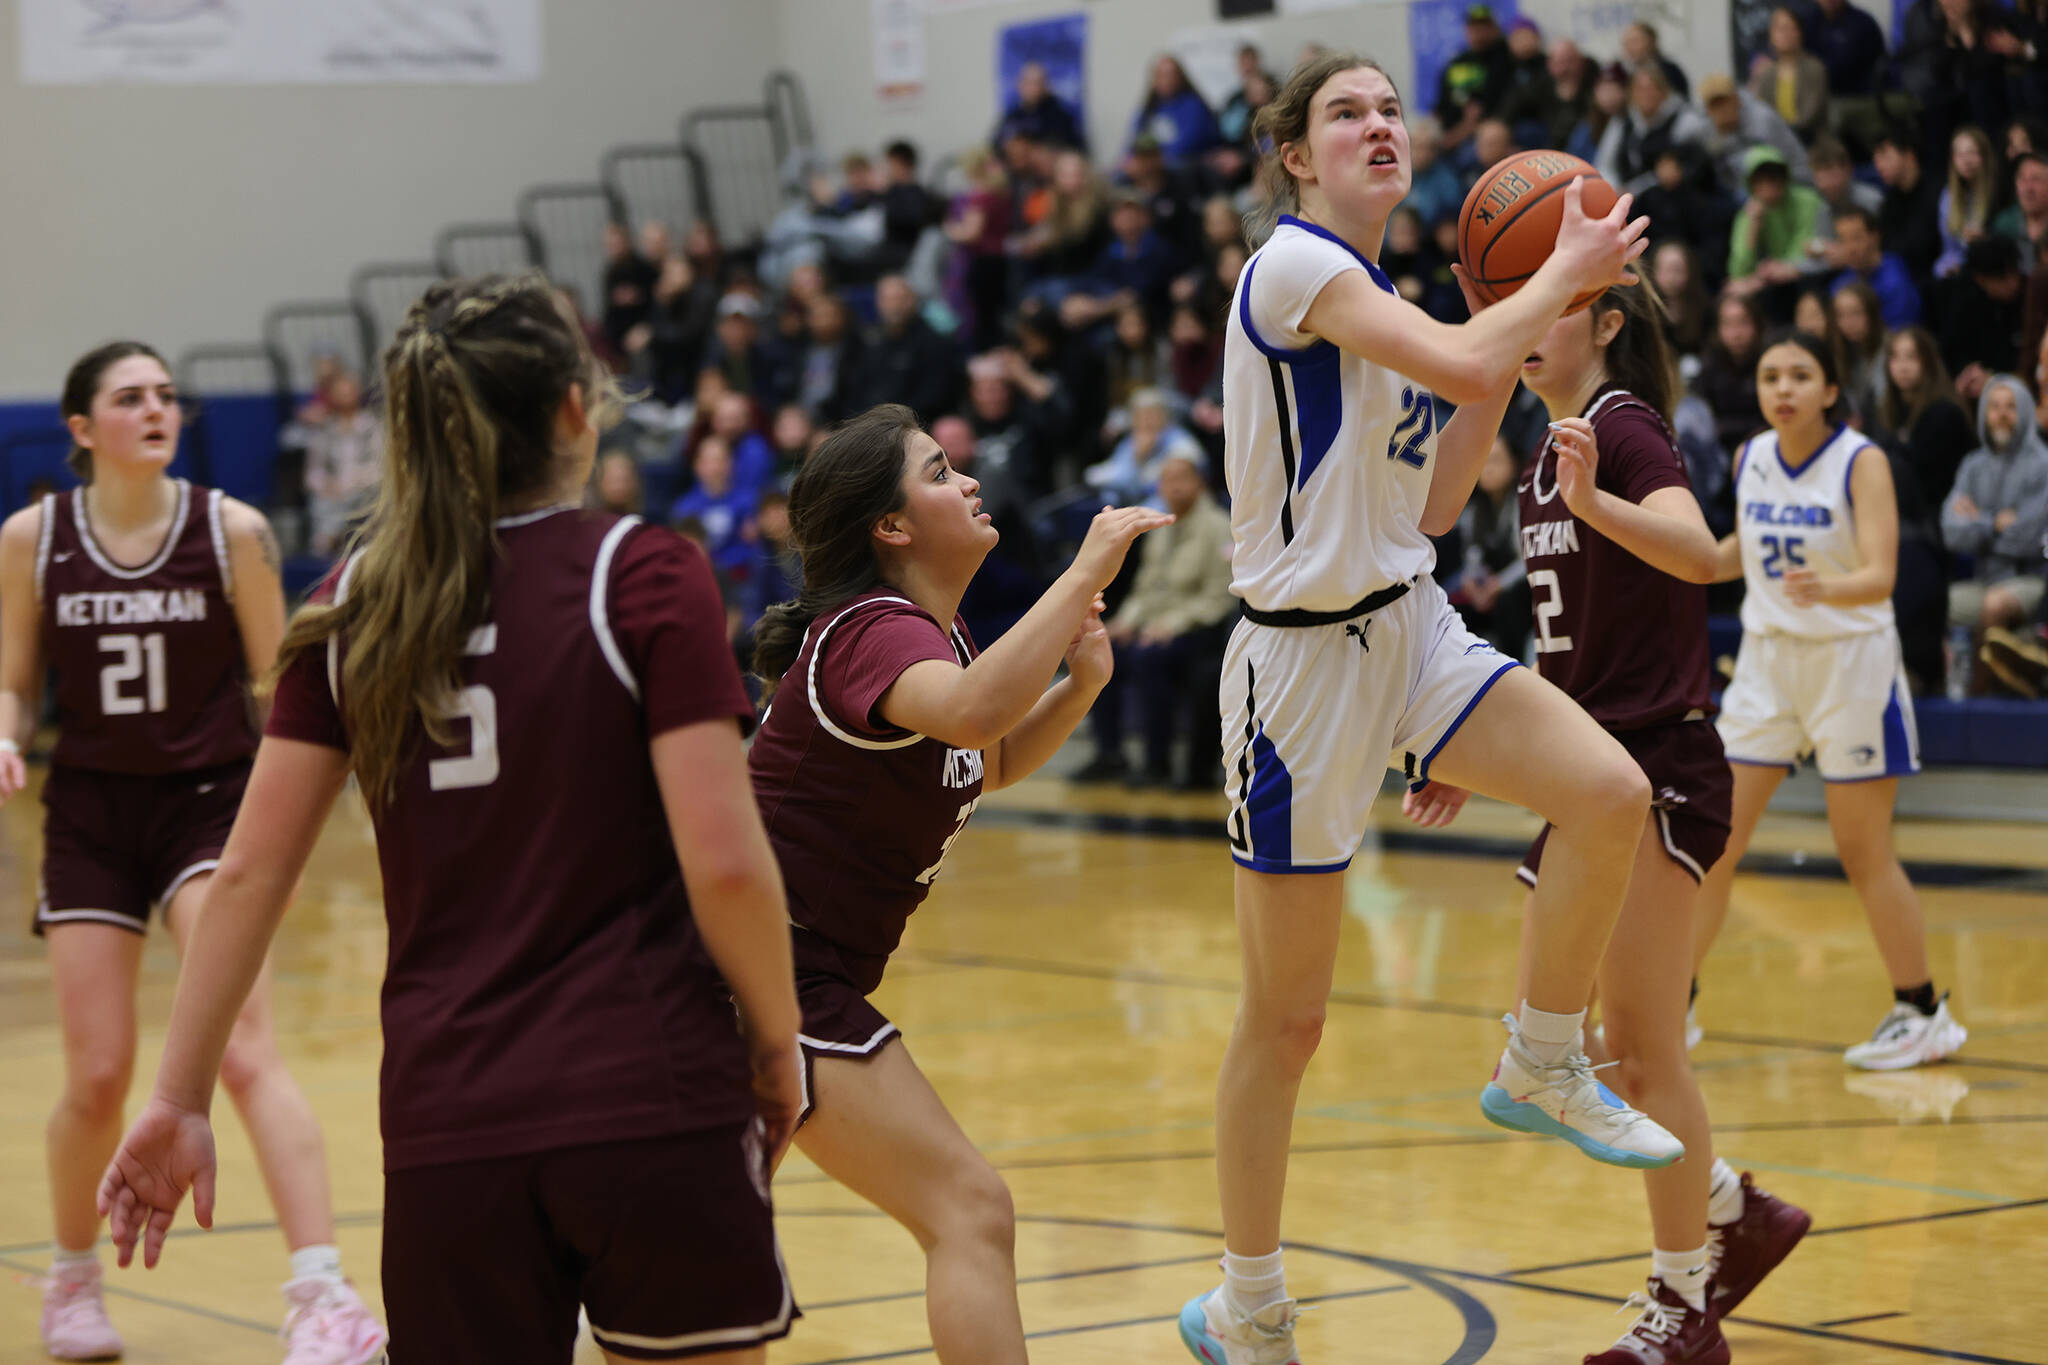 Sophomore Kerra Baxter, who led TMHS in scoring with 16 points, including a 9 points in the fourth quarter, drives toward the hoop during a Friday night home win. (Ben Hohenstatt / Juneau Empire)